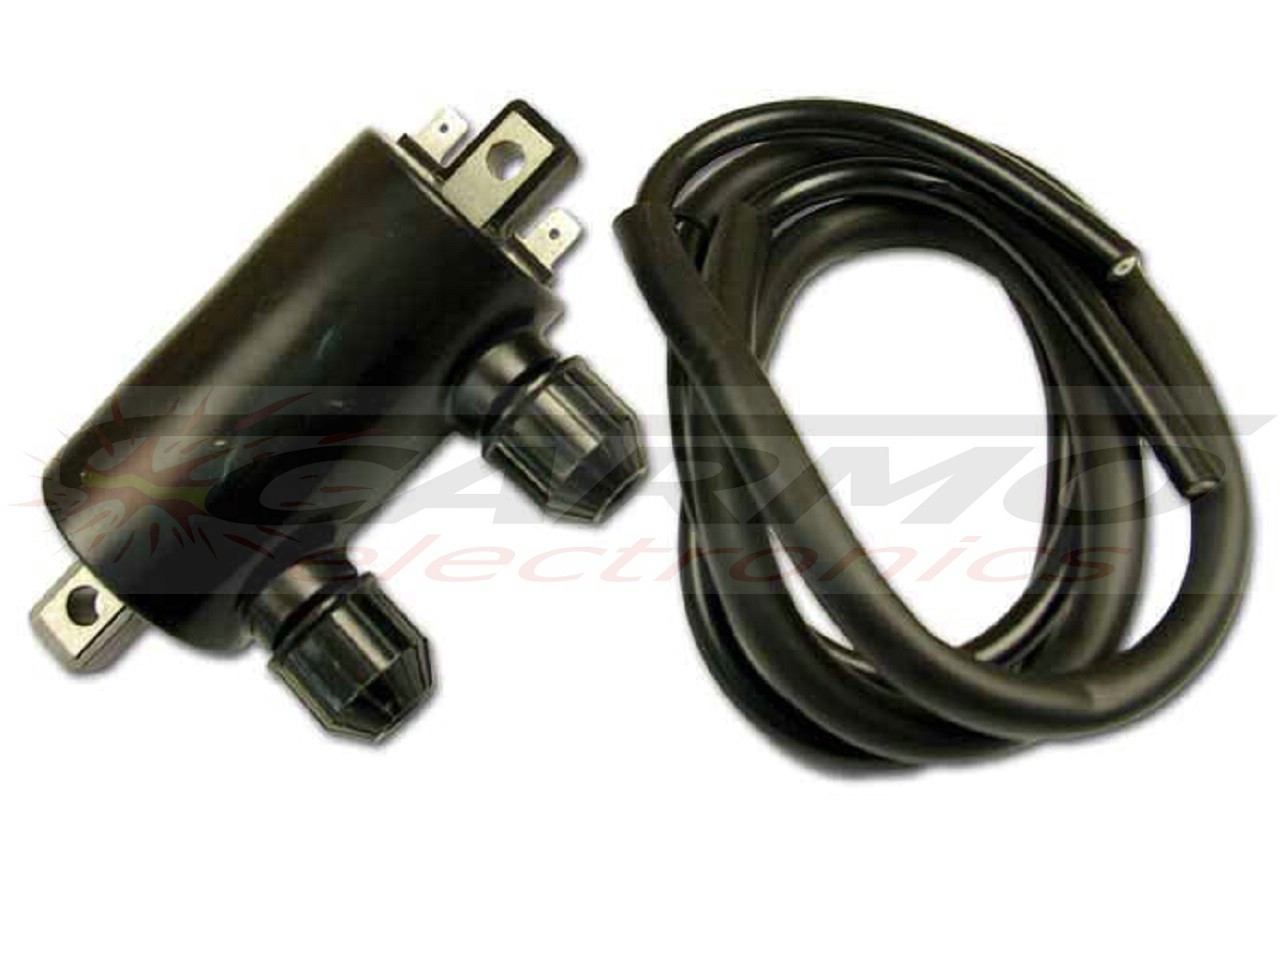 HT75 - 12V twin TCI ignition coil - Click Image to Close